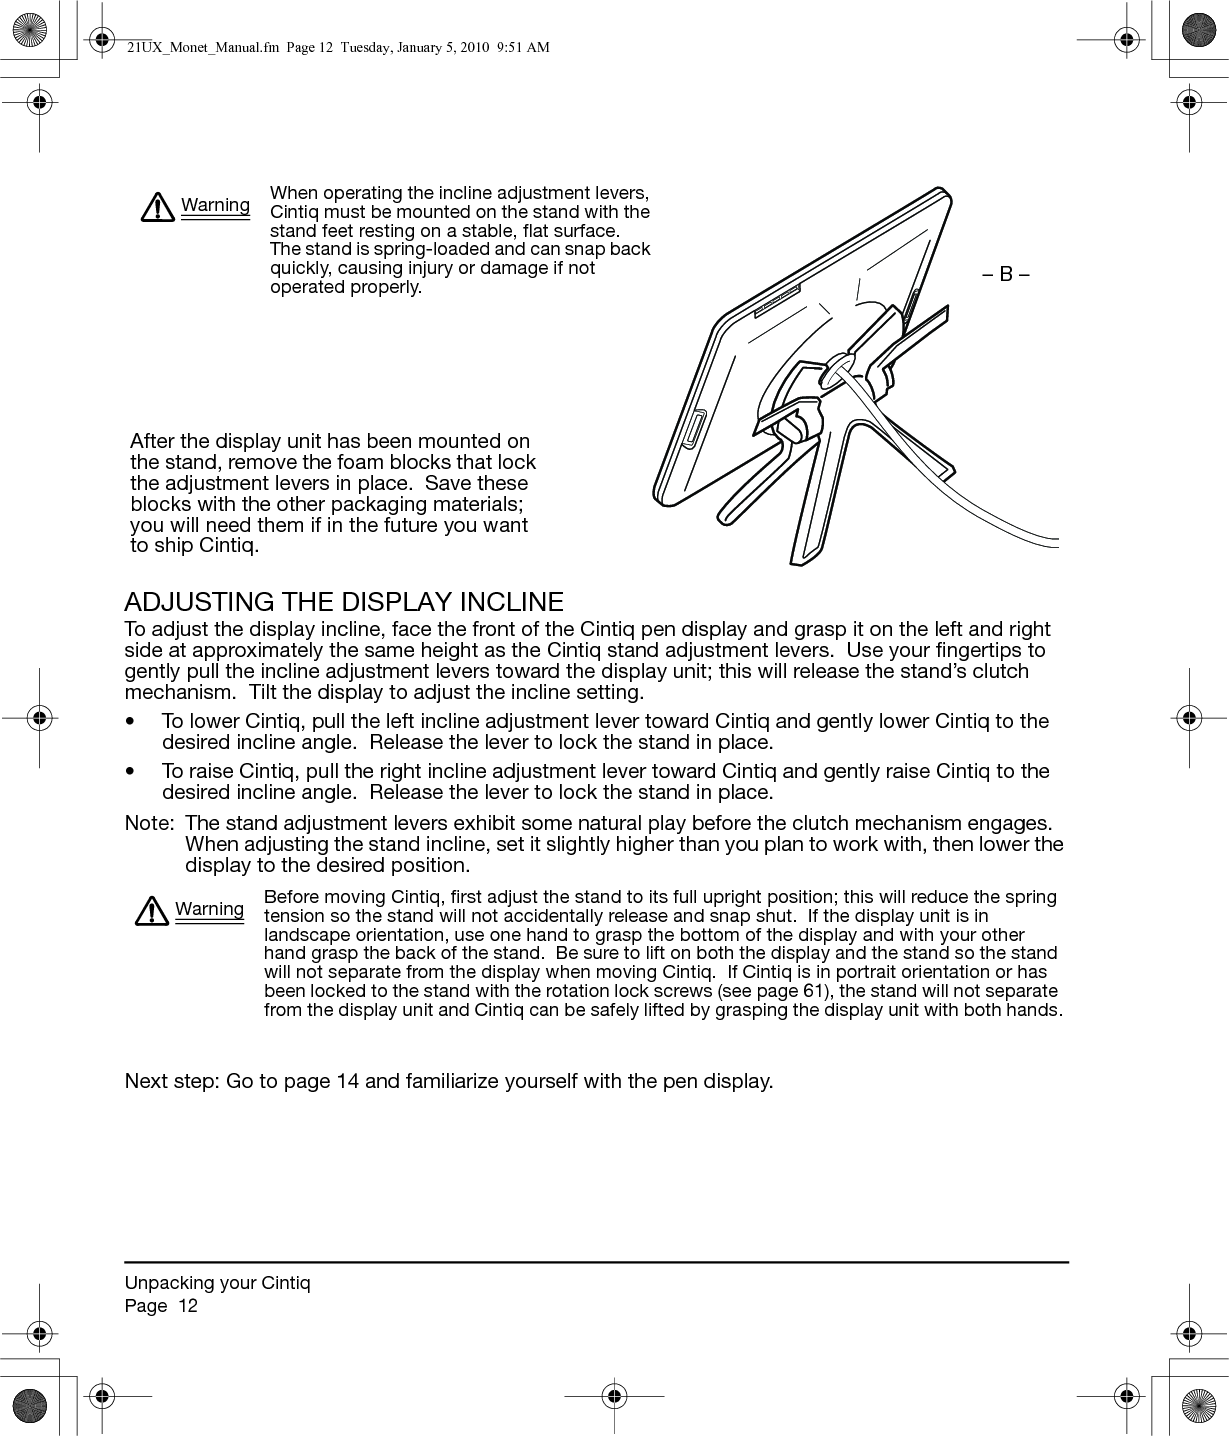 Unpacking your CintiqPage  12ADJUSTING THE DISPLAY INCLINETo adjust the display incline, face the front of the Cintiq pen display and grasp it on the left and right side at approximately the same height as the Cintiq stand adjustment levers.  Use your fingertips to gently pull the incline adjustment levers toward the display unit; this will release the stand’s clutch mechanism.  Tilt the display to adjust the incline setting.• To lower Cintiq, pull the left incline adjustment lever toward Cintiq and gently lower Cintiq to the desired incline angle.  Release the lever to lock the stand in place.• To raise Cintiq, pull the right incline adjustment lever toward Cintiq and gently raise Cintiq to the desired incline angle.  Release the lever to lock the stand in place.Note:  The stand adjustment levers exhibit some natural play before the clutch mechanism engages.  When adjusting the stand incline, set it slightly higher than you plan to work with, then lower the display to the desired position. Next step: Go to page 14 and familiarize yourself with the pen display.When operating the incline adjustment levers, Cintiq must be mounted on the stand with the stand feet resting on a stable, flat surface.  The stand is spring-loaded and can snap back quickly, causing injury or damage if not operated properly.WarningAfter the display unit has been mounted on the stand, remove the foam blocks that lock the adjustment levers in place.  Save these blocks with the other packaging materials; you will need them if in the future you want to ship Cintiq.– B –Before moving Cintiq, first adjust the stand to its full upright position; this will reduce the spring tension so the stand will not accidentally release and snap shut.  If the display unit is in landscape orientation, use one hand to grasp the bottom of the display and with your other hand grasp the back of the stand.  Be sure to lift on both the display and the stand so the stand will not separate from the display when moving Cintiq.  If Cintiq is in portrait orientation or has been locked to the stand with the rotation lock screws (see page 61), the stand will not separate from the display unit and Cintiq can be safely lifted by grasping the display unit with both hands.Warning21UX_Monet_Manual.fm  Page 12  Tuesday, January 5, 2010  9:51 AM